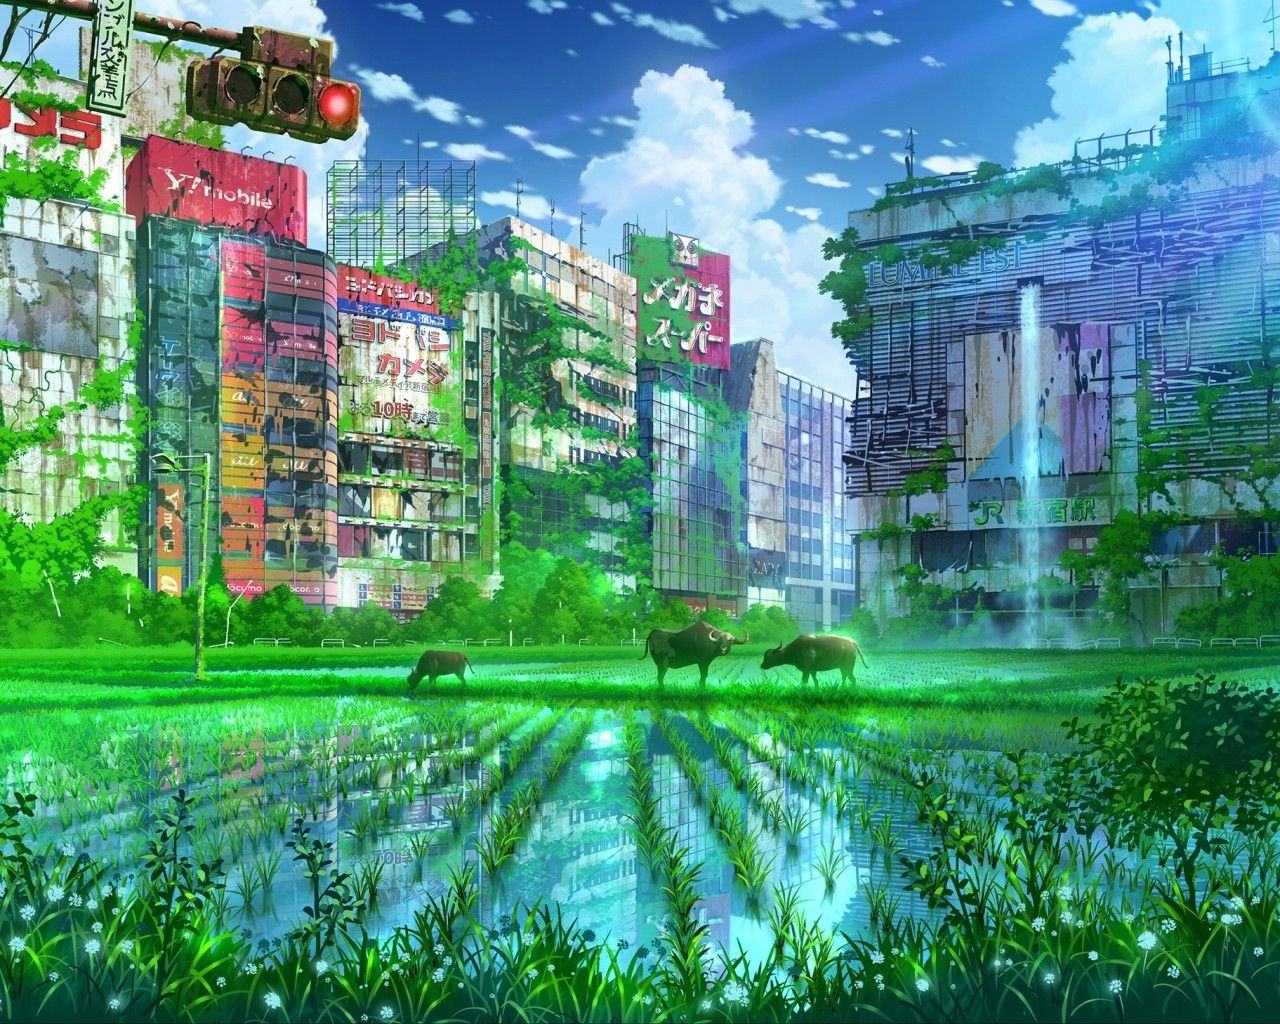 100+] Anime Scenery 4k Wallpapers | Wallpapers.com